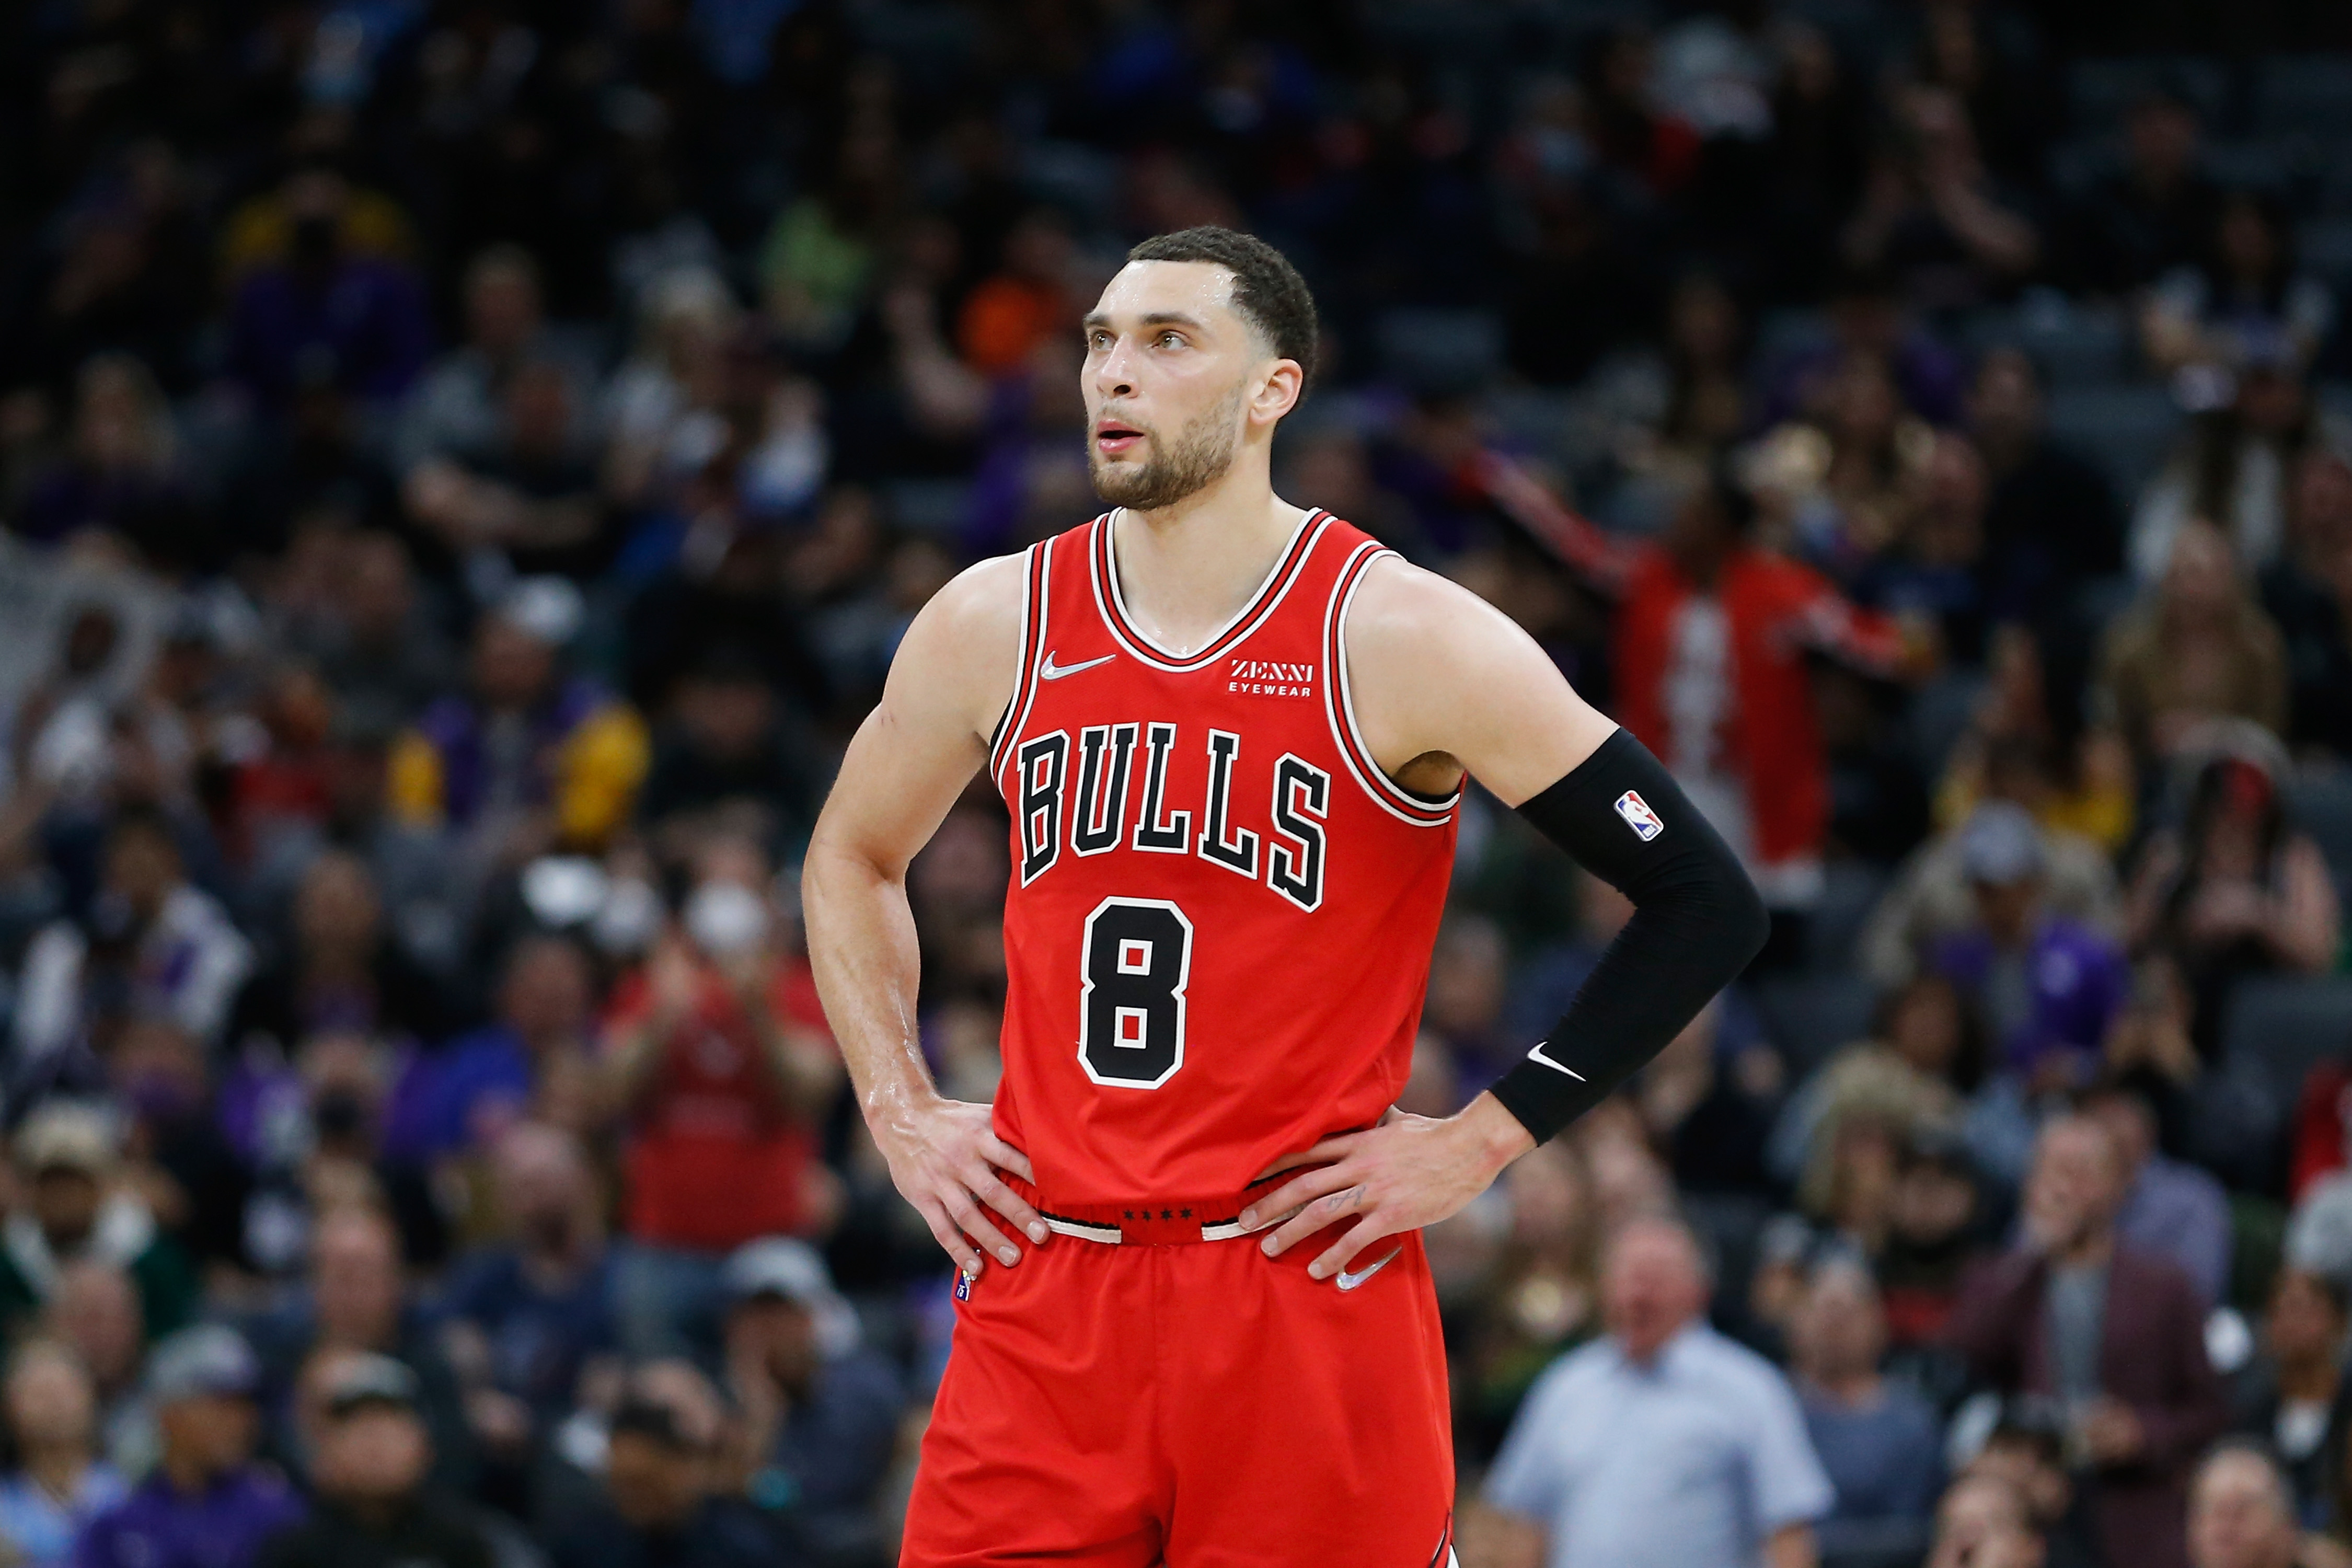 Chicago Bulls guard Zach LaVine looks on during an NBA game against the Sacramento Kings in March 2022